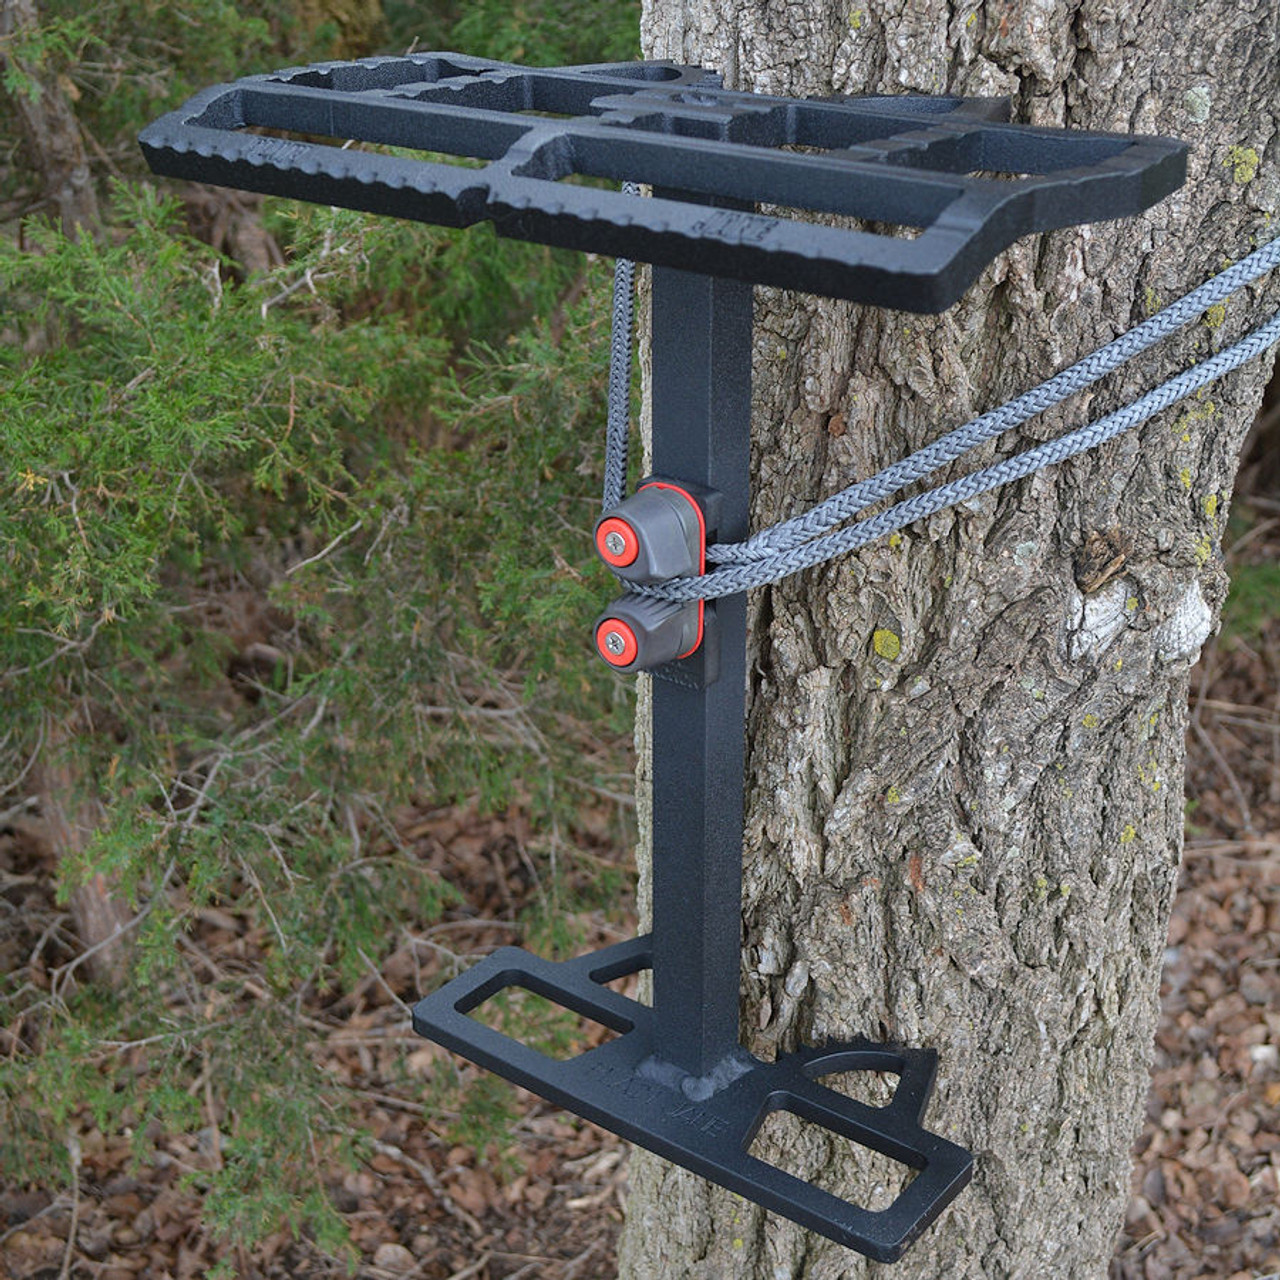 Saddle Hunting Gear, Climbing Sticks, Tree Stands From OOAL